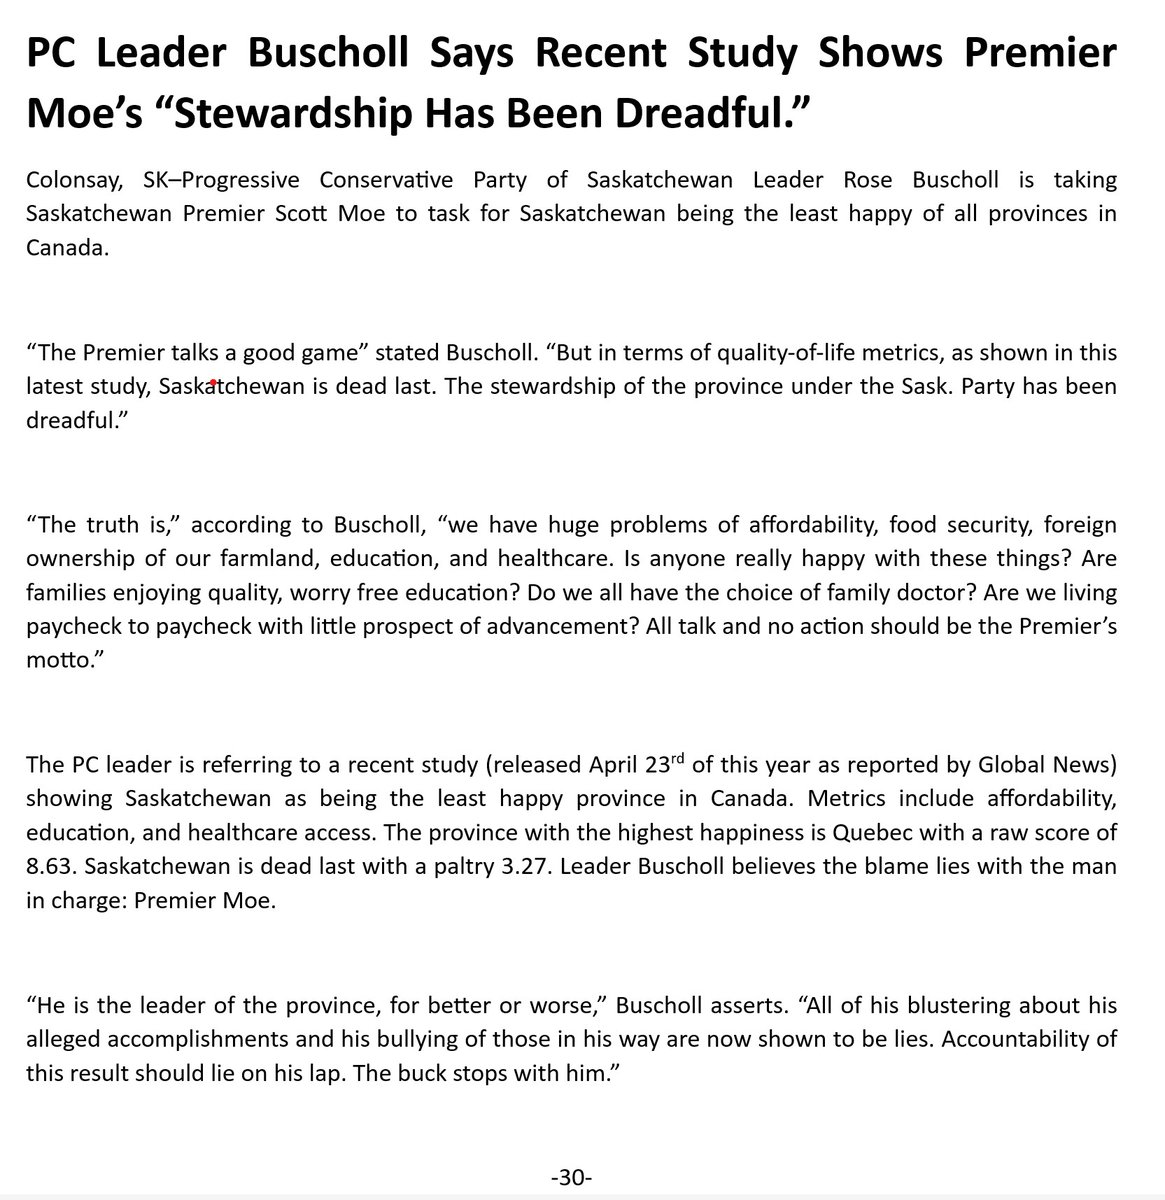 “All of his blustering about his alleged accomplishments are now shown to be lies. Accountability of this result should lie on his lap. The buck stops with him.”-PC Leader Rose Buscholl See Rose's Full statement about the study below: globalnews.ca/news/10445330/… #skpoli #Sask